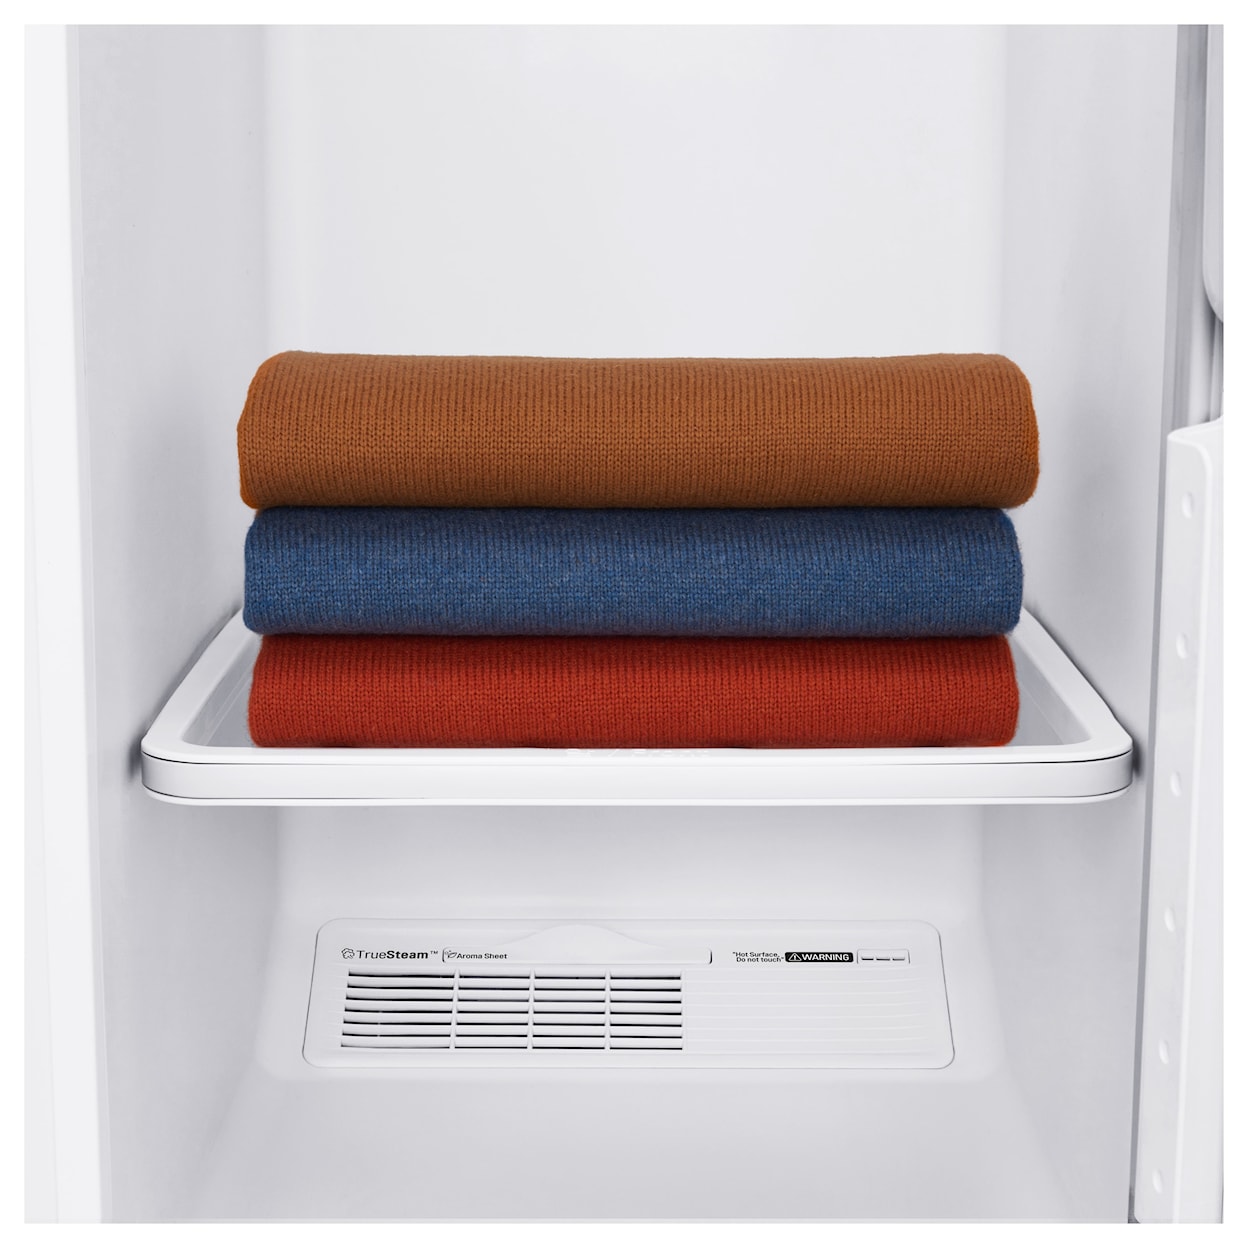 LG Appliances Laundry Accessories - LG Steam Clothing Care System